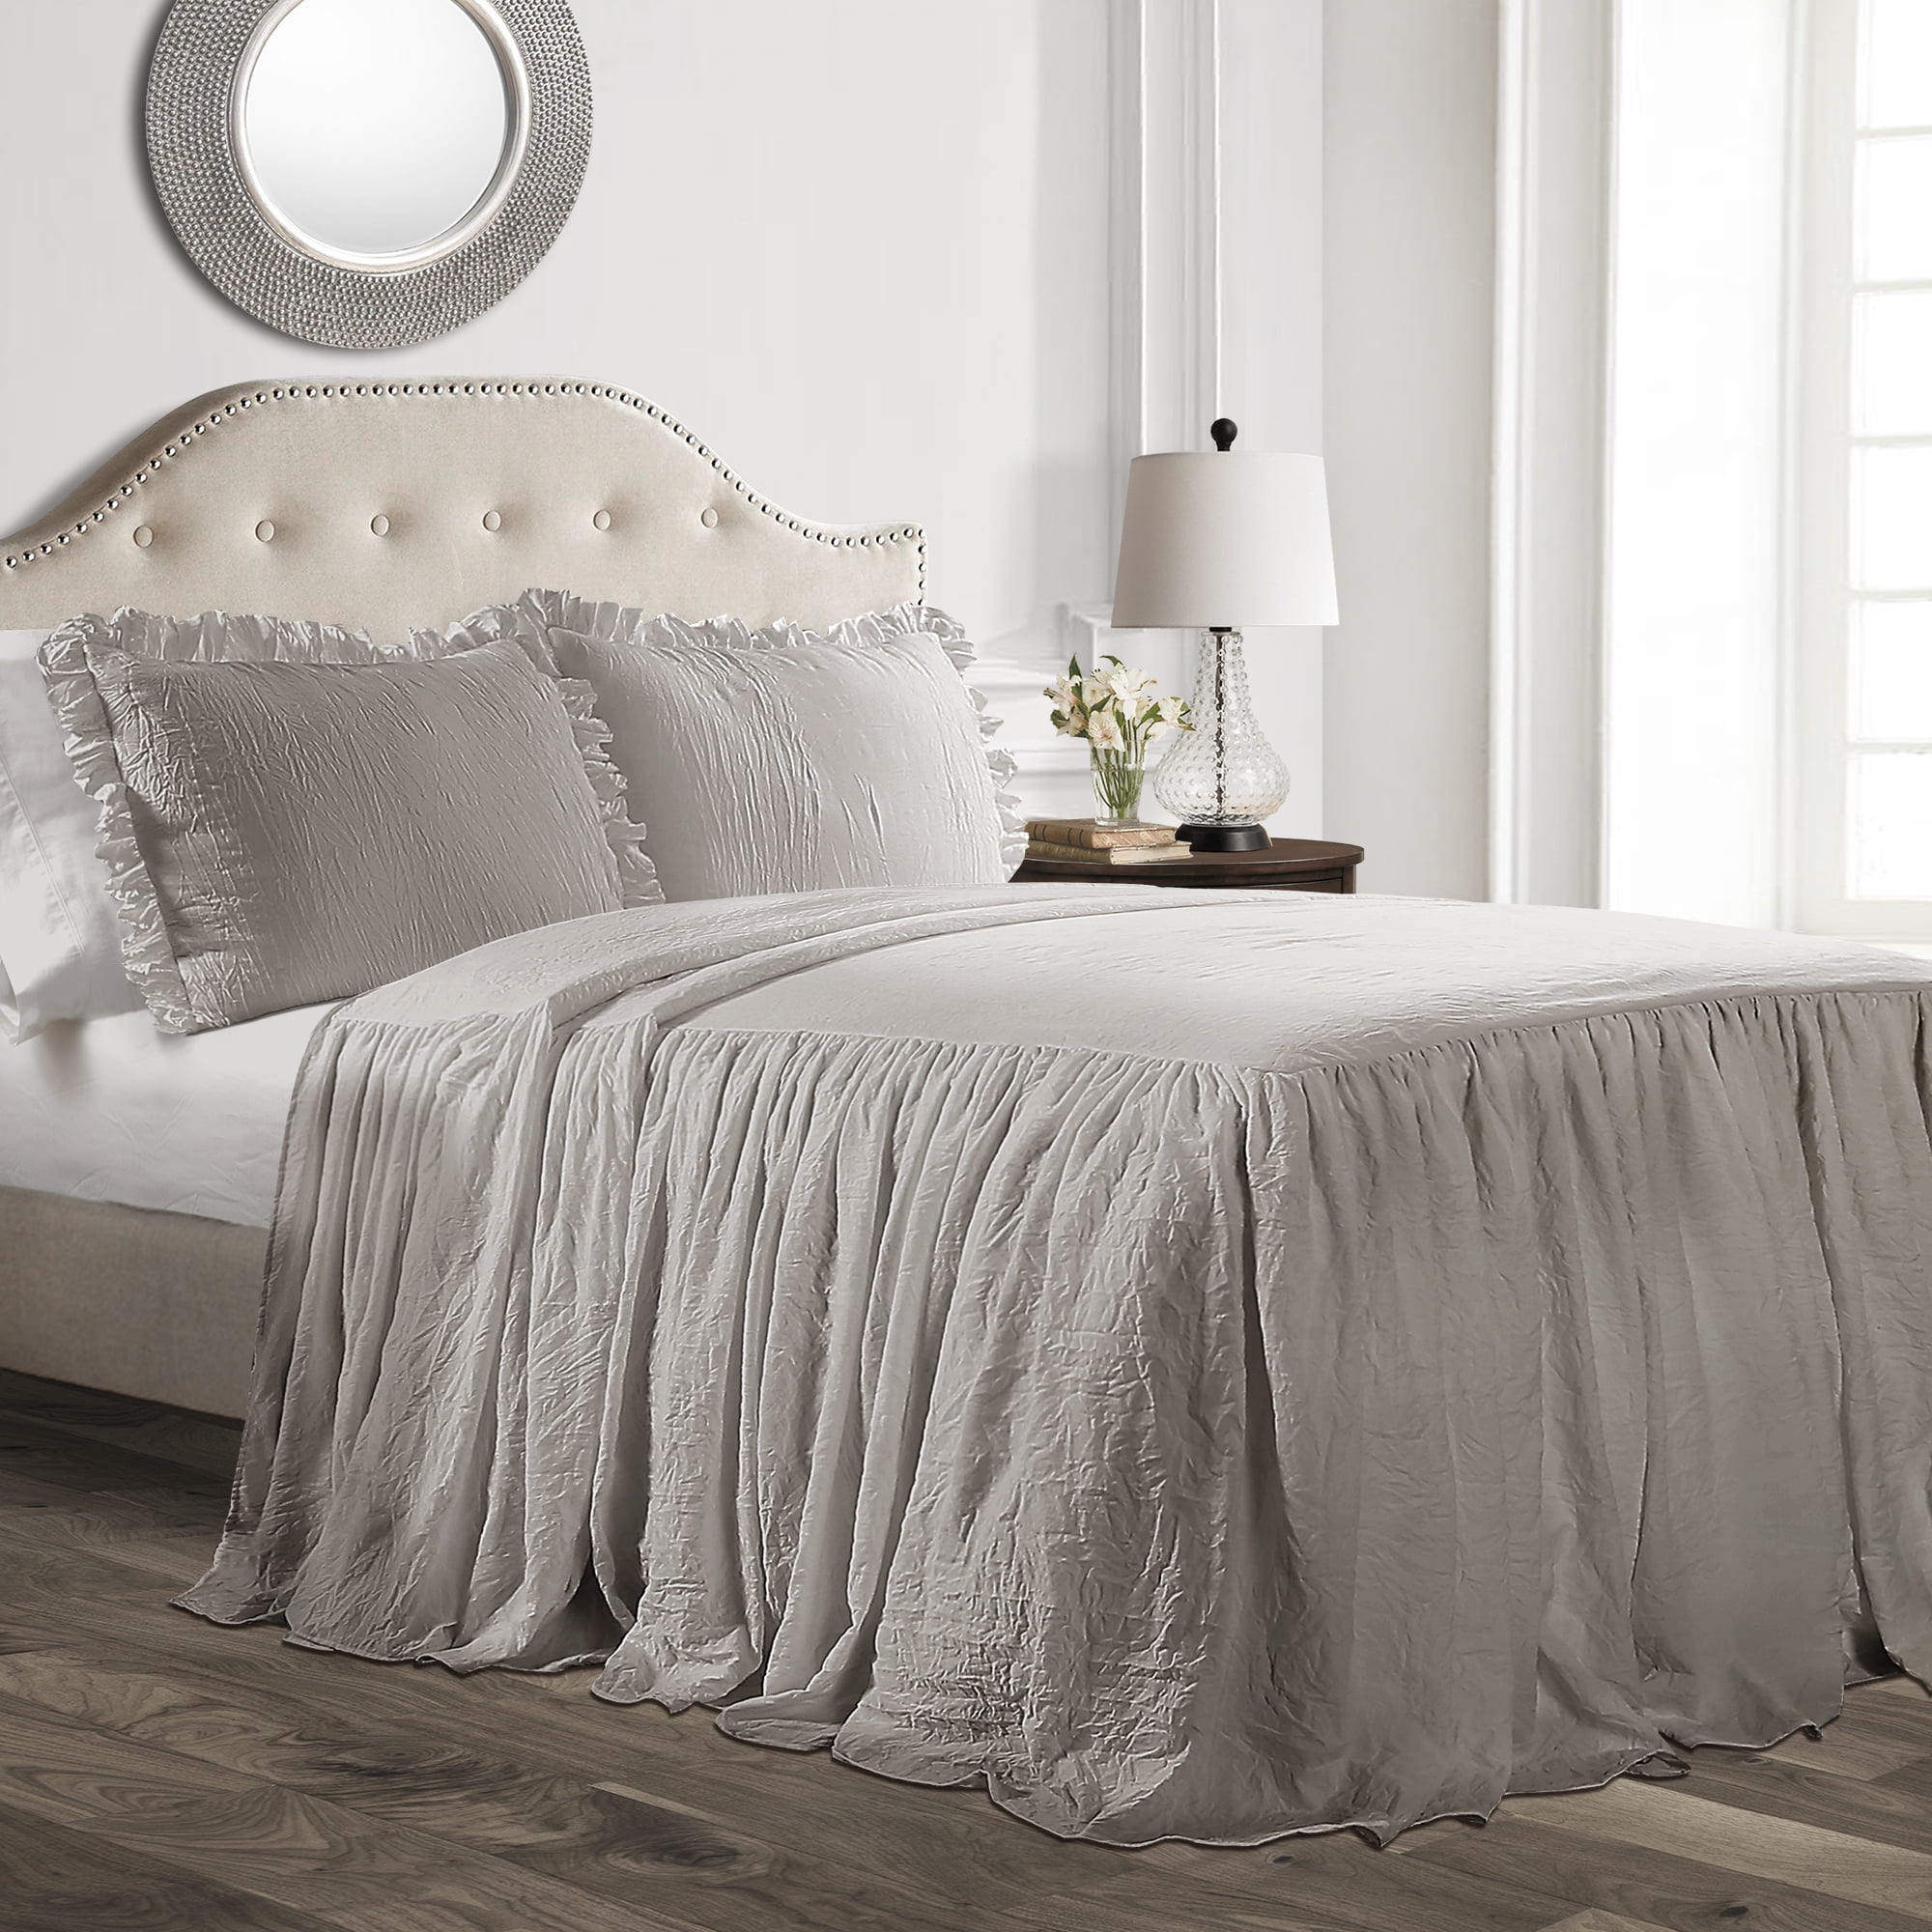 Details about   Cotton Blend Bed Skirt 3 Layers Elastic Dust Ruffles Wrap Bedspread Bedding King 